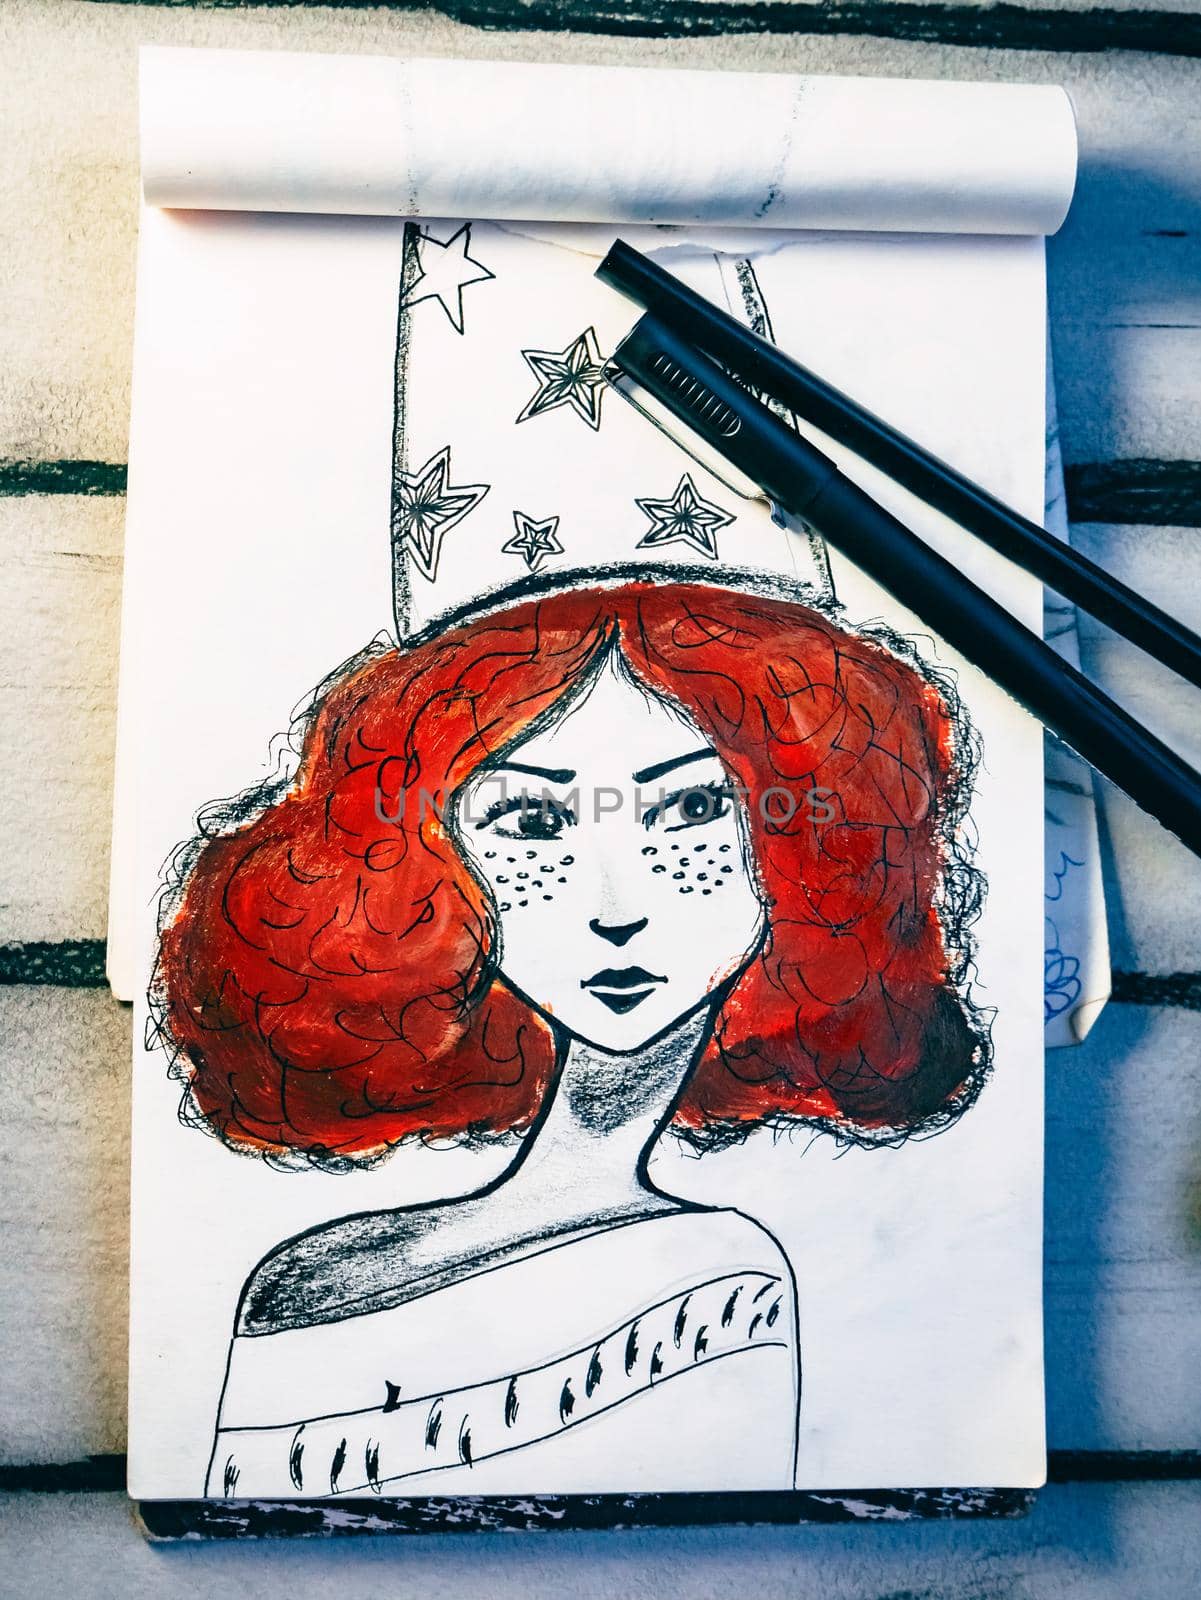 Painting concept. Drawing of a red-haired girl. Bishkek, Kyrgyzstan - March 12, 2017.